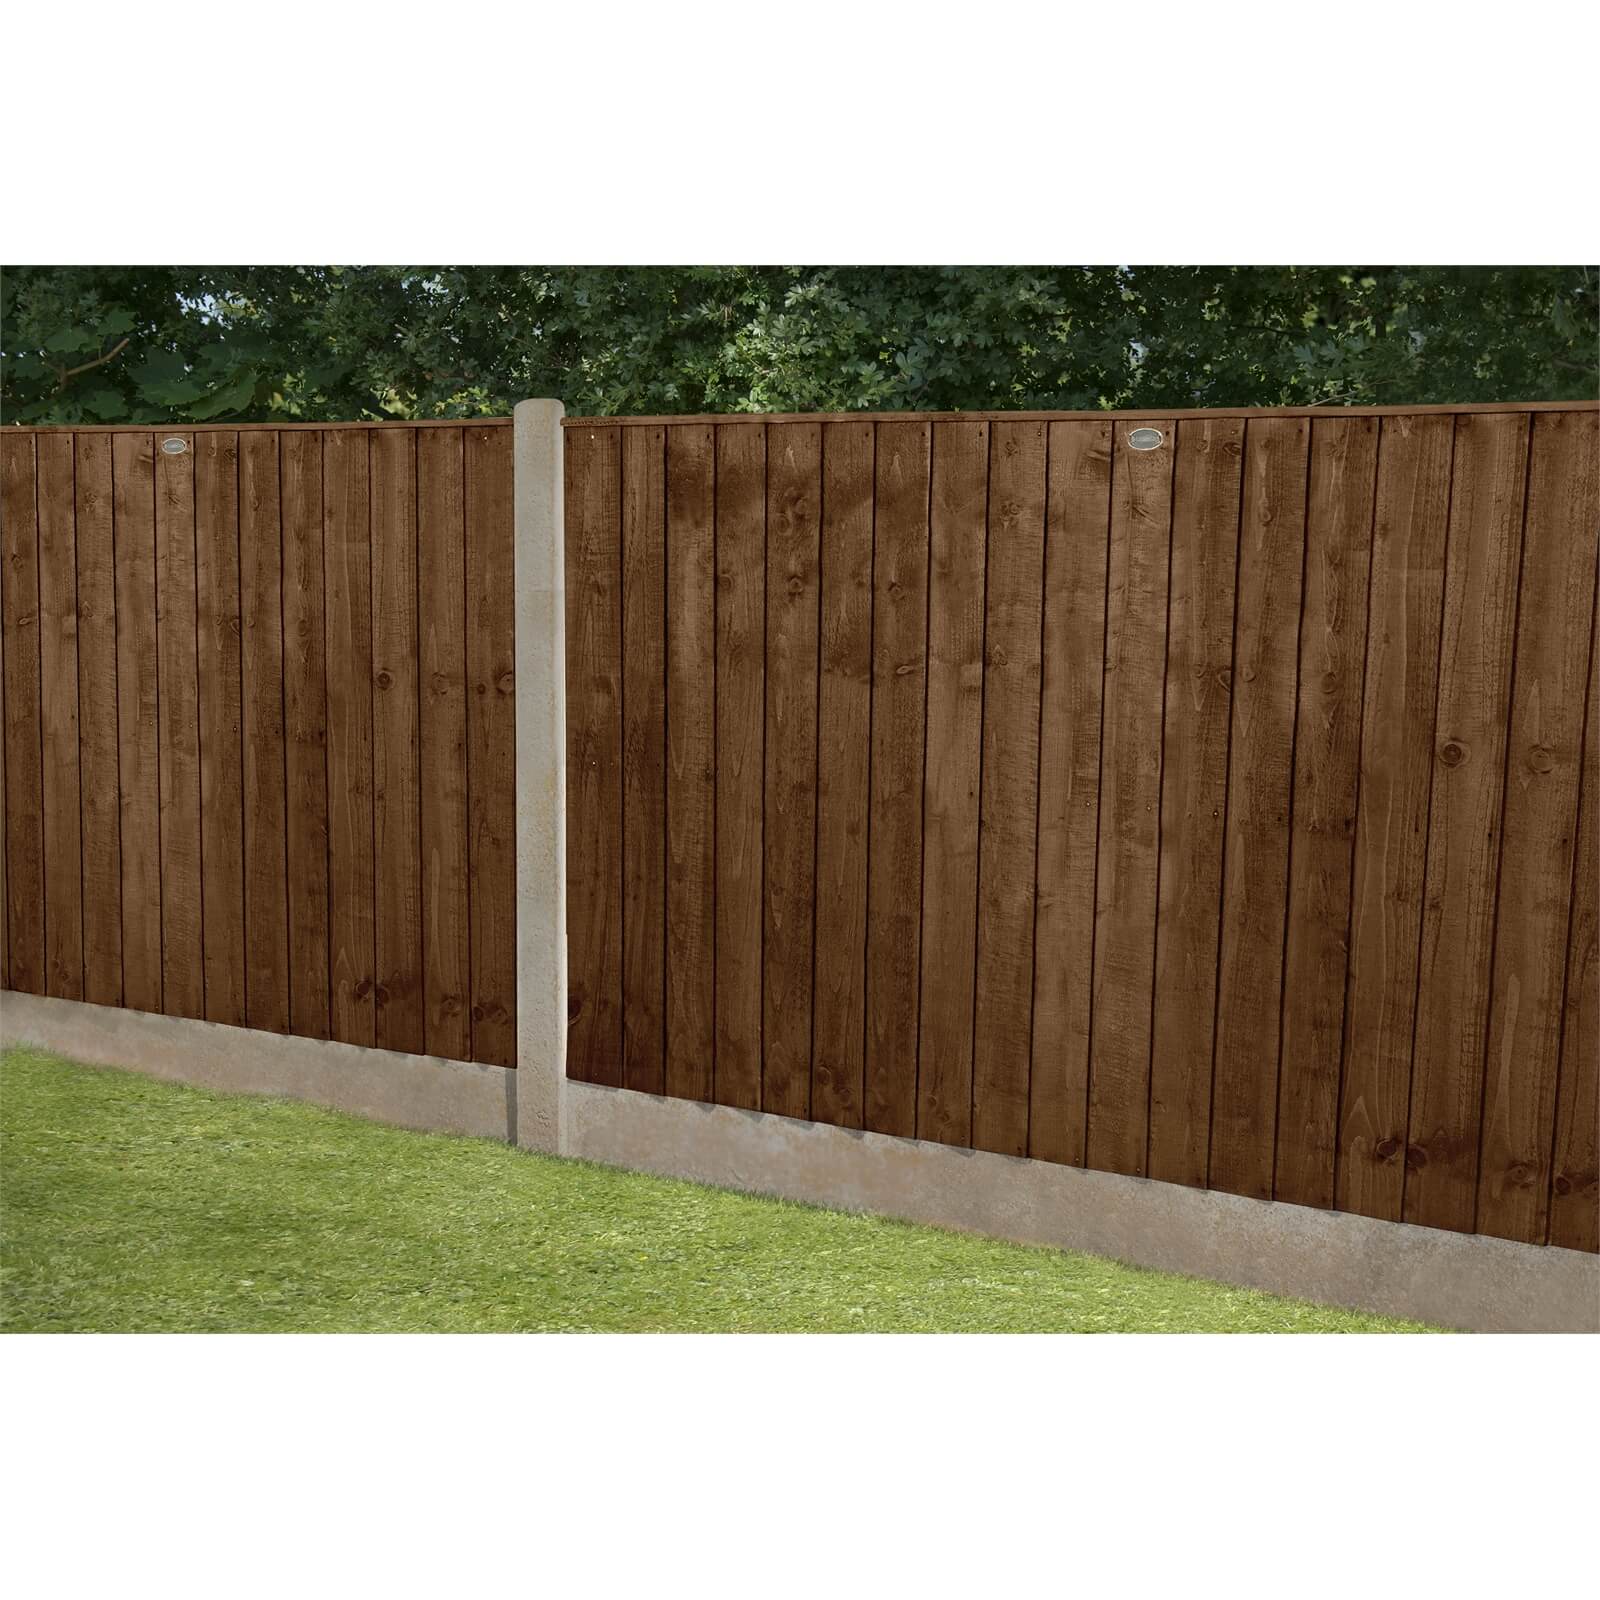 6ft x 4ft (1.83m x 1.23m) Pressure Treated Featheredge Fence Panel (Dark Brown) - Pack of 20